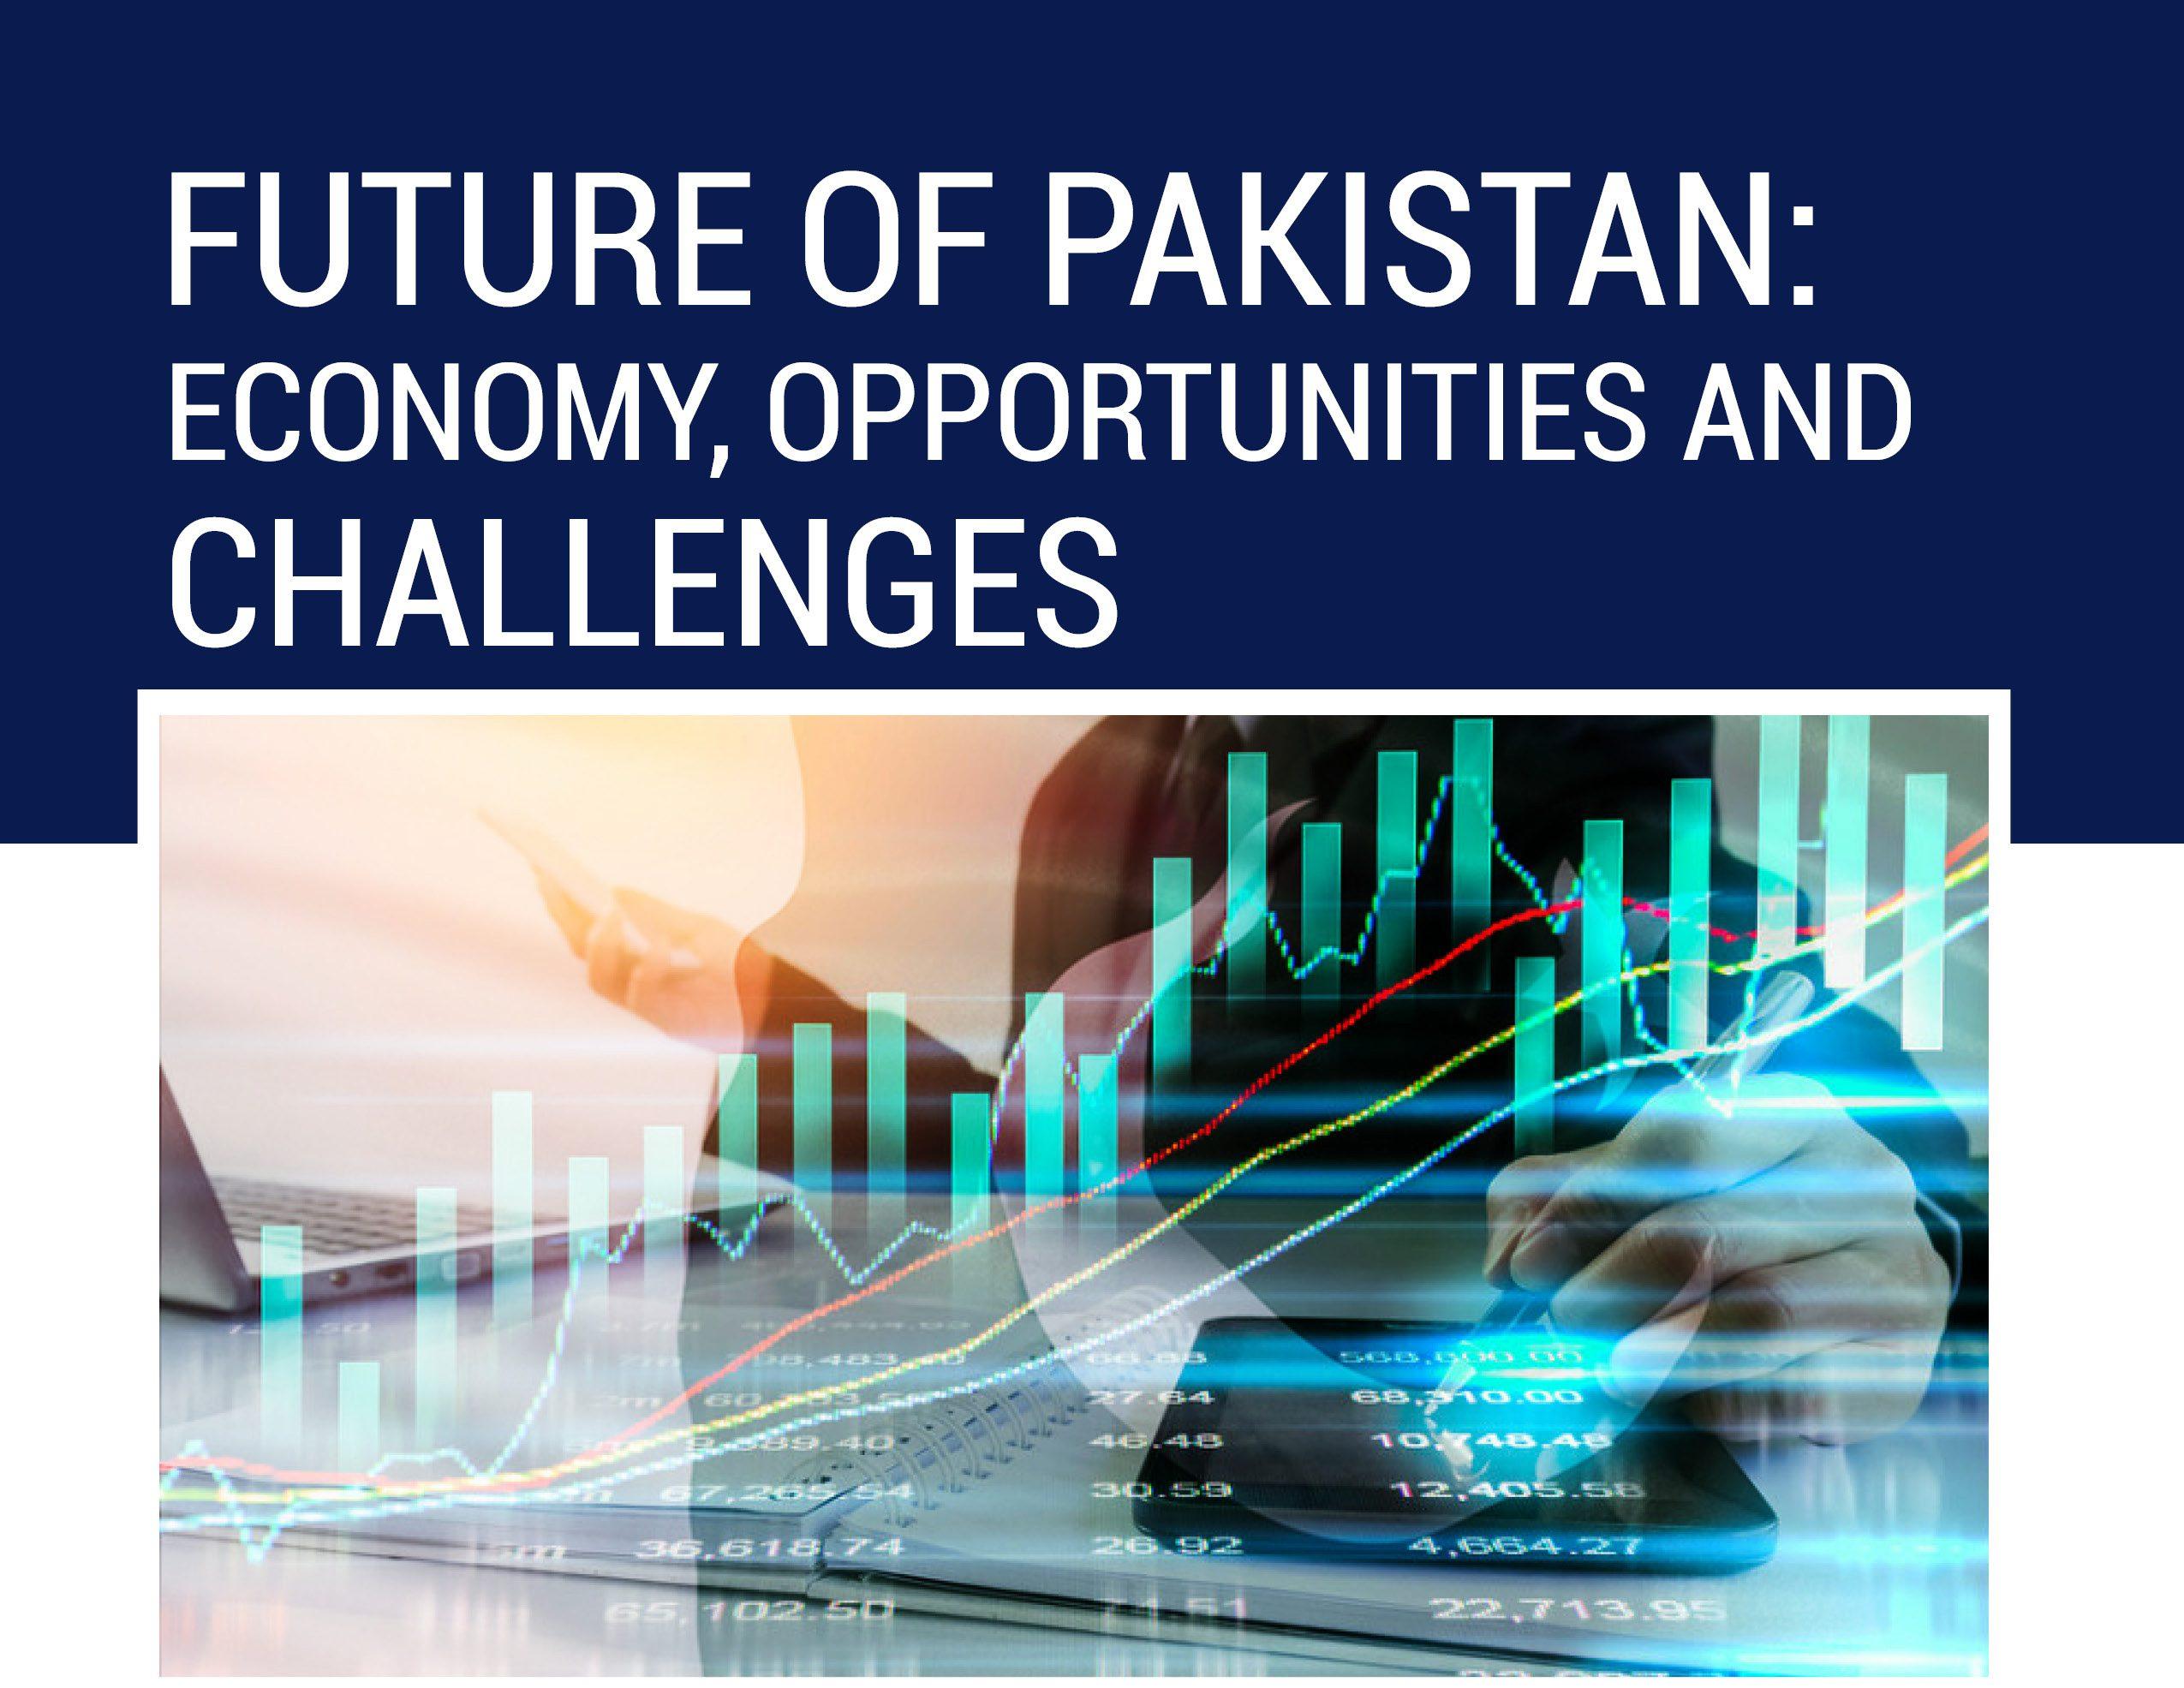 Future of Pakistan Economy, Opportunities and Challenges